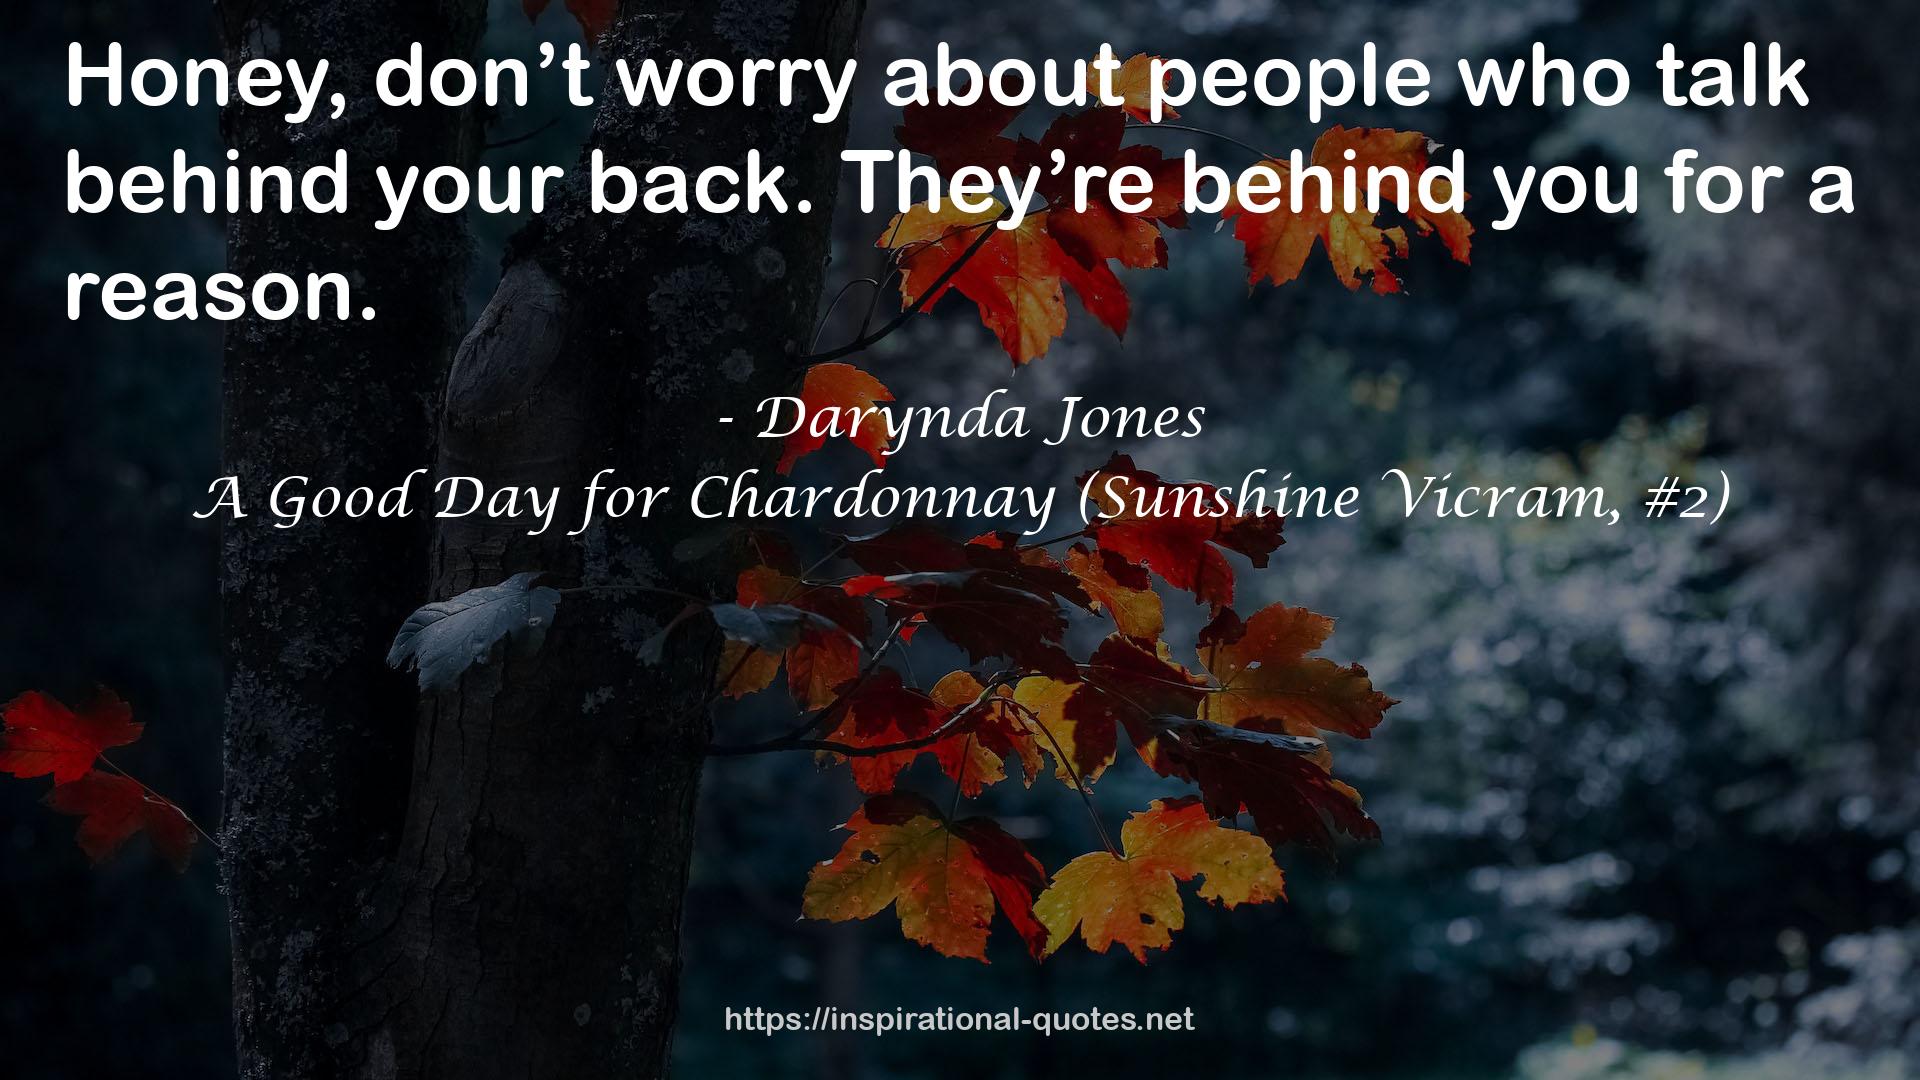 A Good Day for Chardonnay (Sunshine Vicram, #2) QUOTES